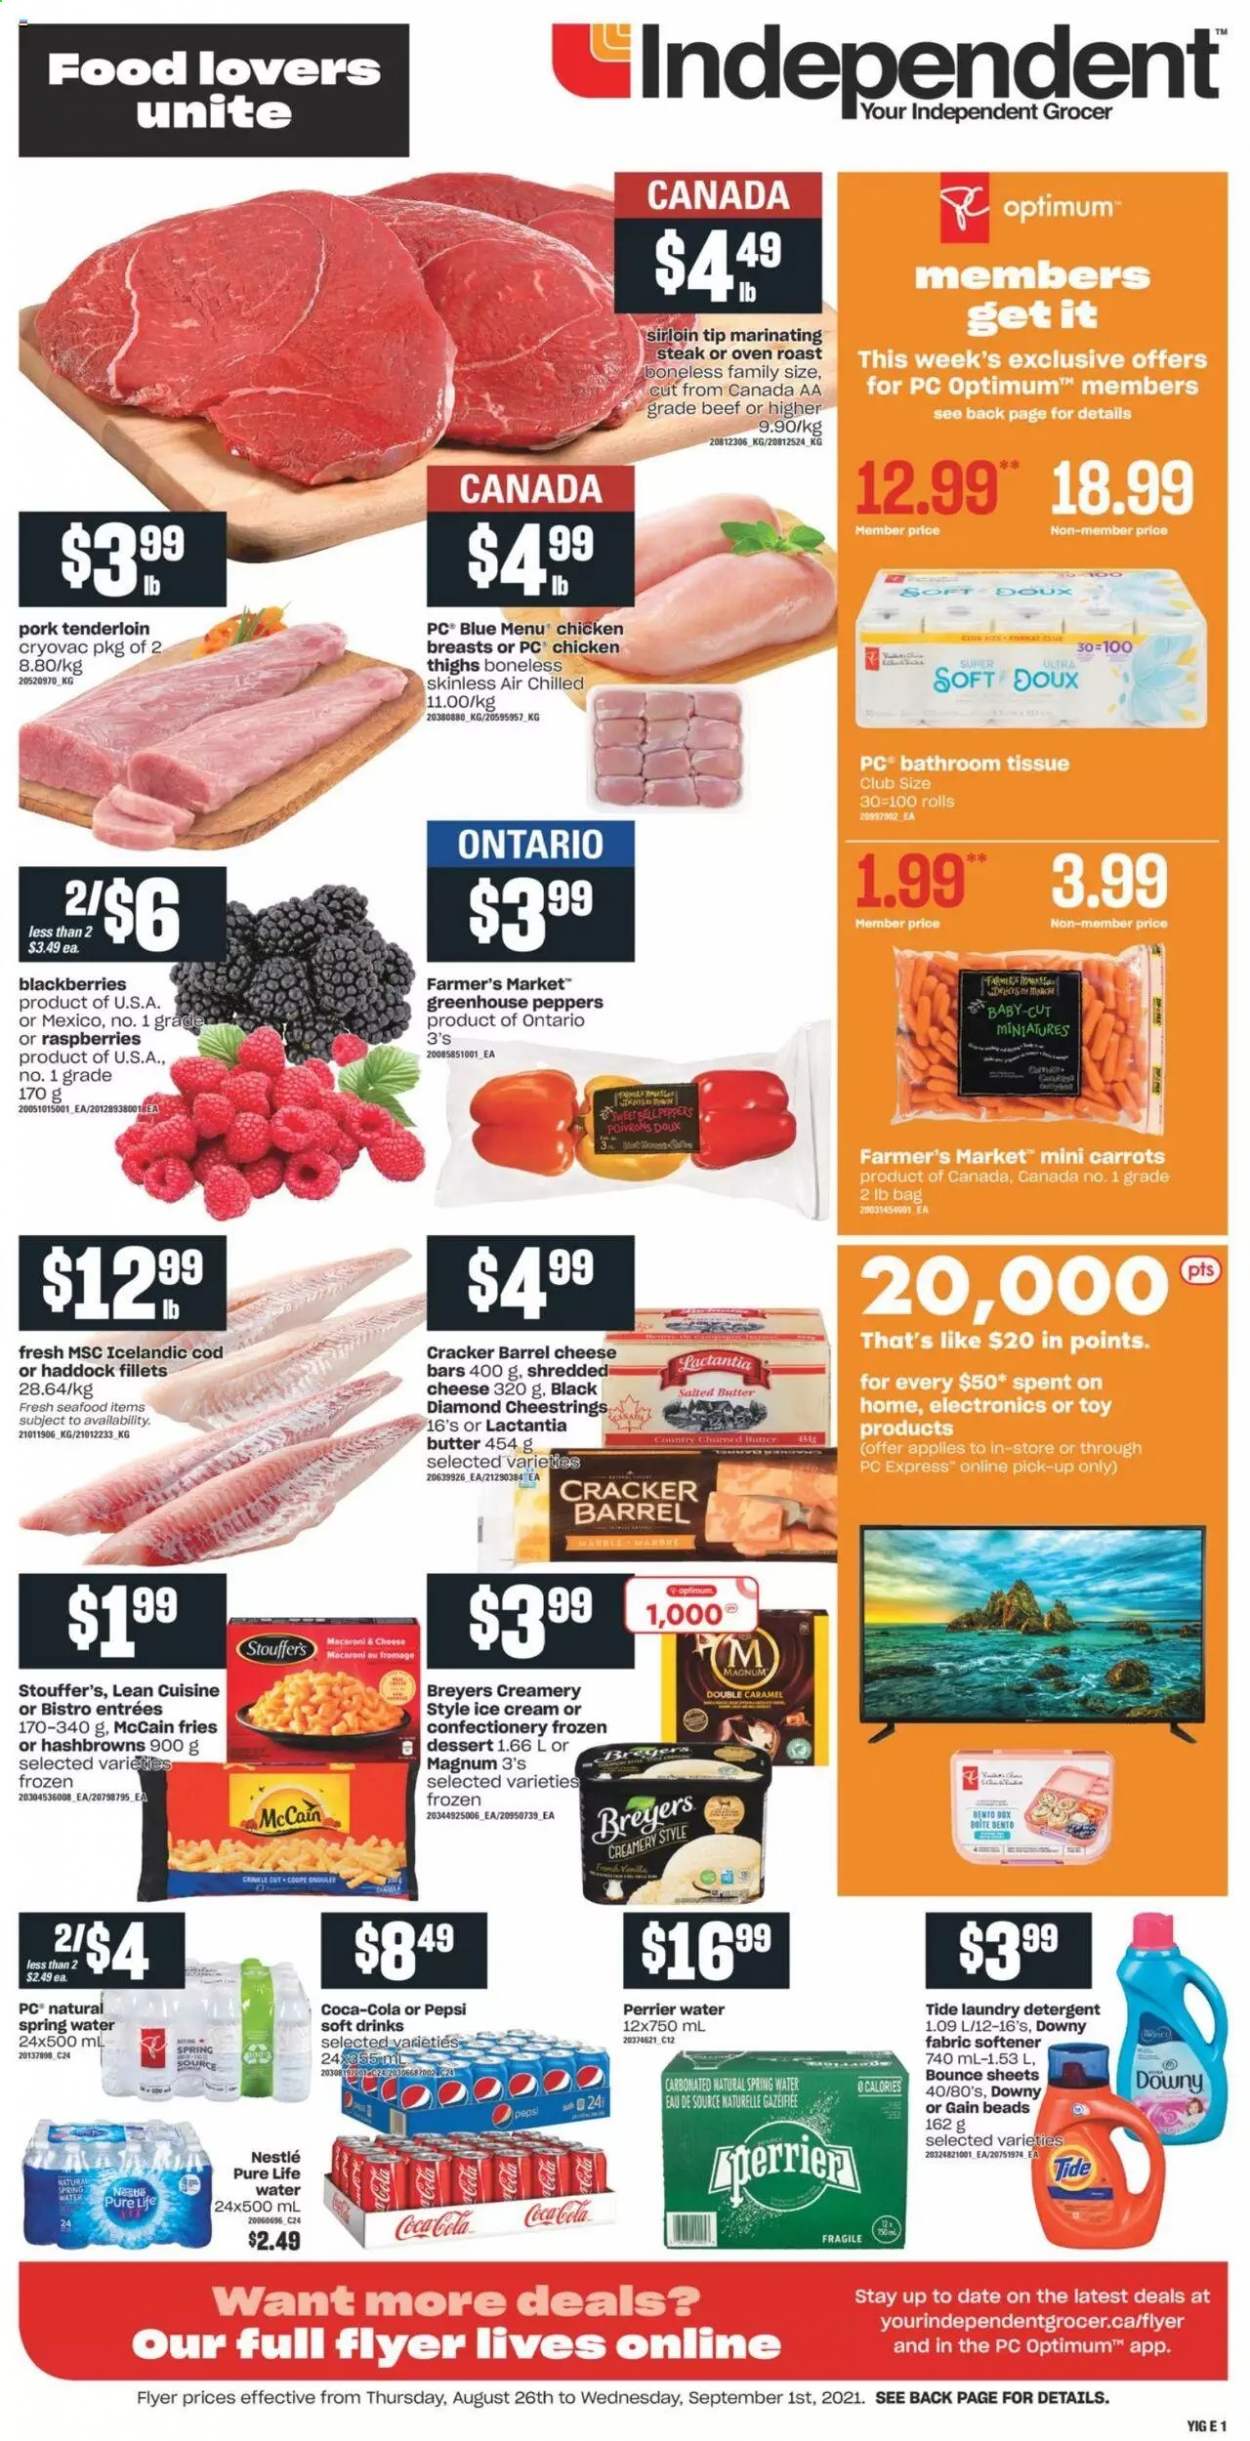 thumbnail - Independent Flyer - August 26, 2021 - September 01, 2021 - Sales products - carrots, peppers, blackberries, cod, haddock, seafood, macaroni, Lean Cuisine, shredded cheese, string cheese, butter, salted butter, ice cream, Stouffer's, McCain, hash browns, potato fries, crackers, Coca-Cola, Pepsi, soft drink, Perrier, spring water, Pure Life Water, chicken breasts, chicken thighs, chicken, pork meat, pork tenderloin, bath tissue, Gain, Tide, fabric softener, laundry detergent, Bounce, Downy Laundry, Optimum, toys, Nestlé, steak. Page 1.